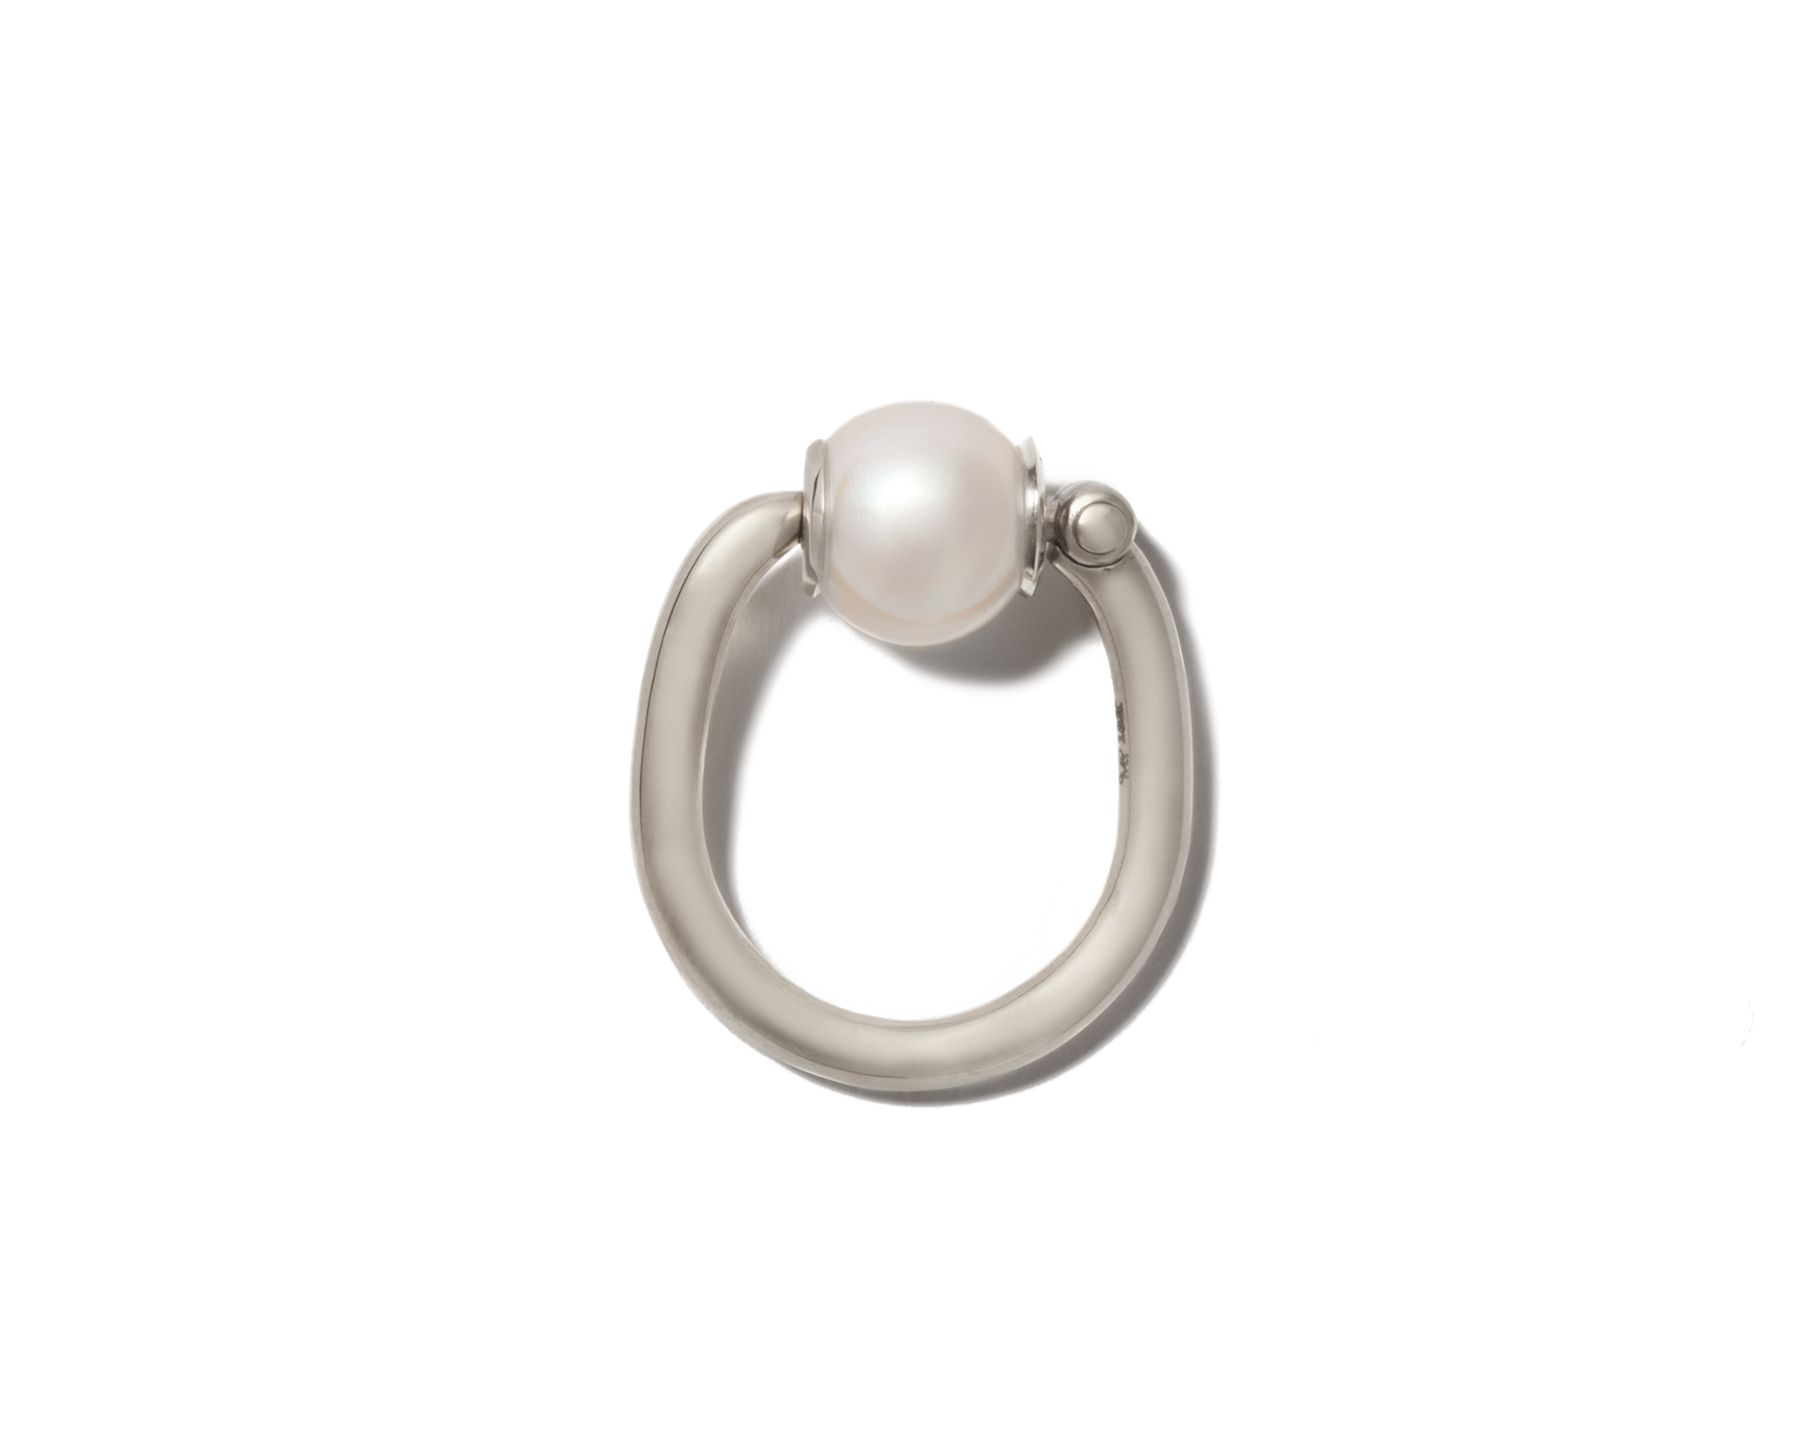 Silver pearl trundle ring with closed clasp